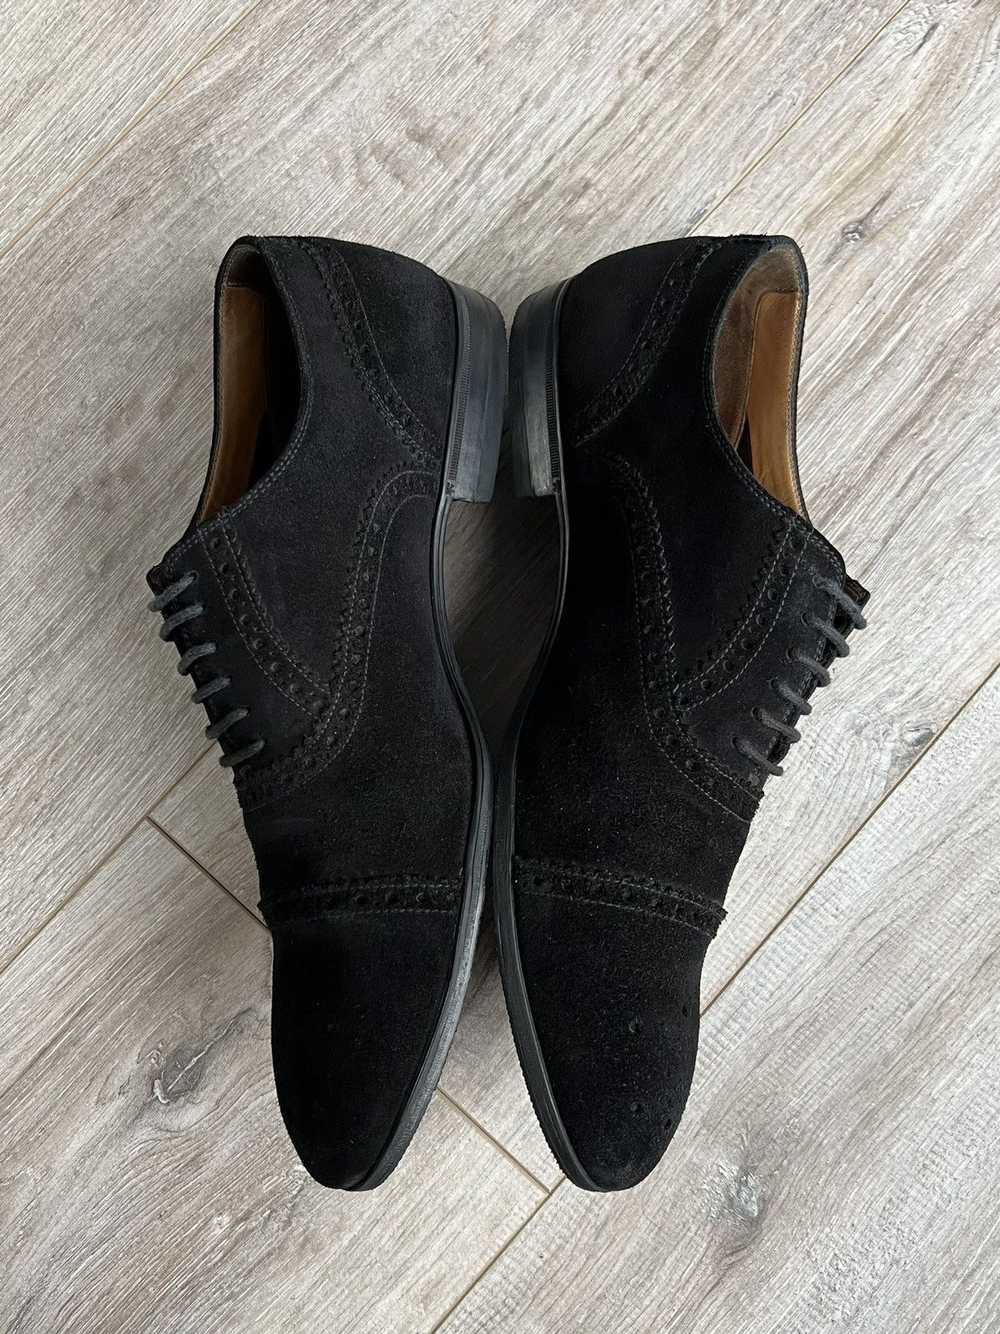 Gucci GUCCI Shoes Oxfords Brogues Suede Lace Up M… - image 12